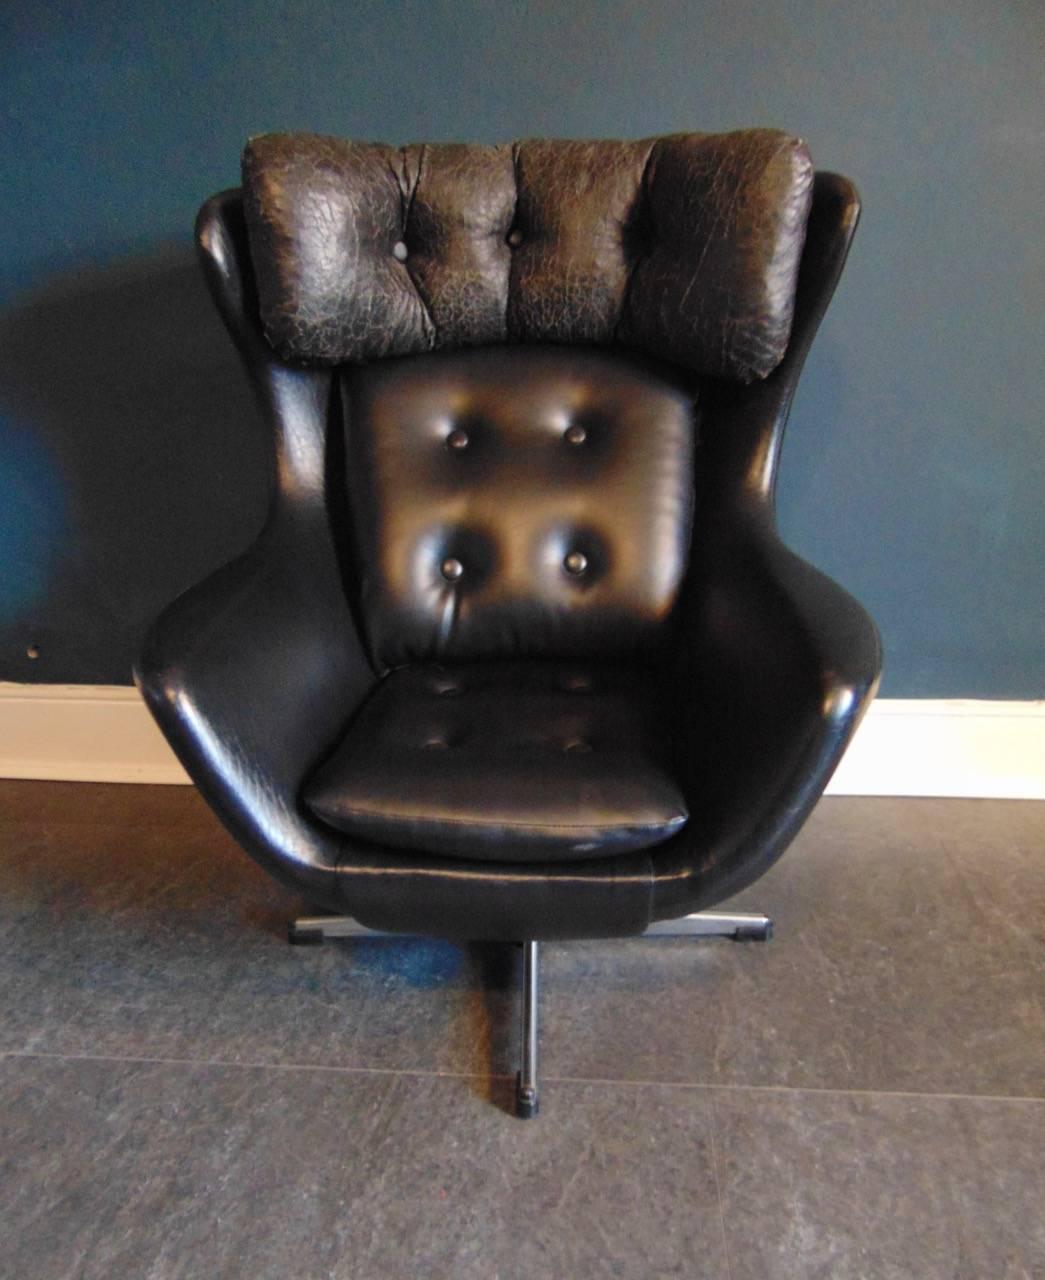 A perfectly proportioned childs swivel chair in the style of the infamous egg chair designed by Arne Jacobsen in 1958.
The chair is upholstered in black vinyl with loose cushions on a four point aluminium X-base.
A fantastic collectors item or the